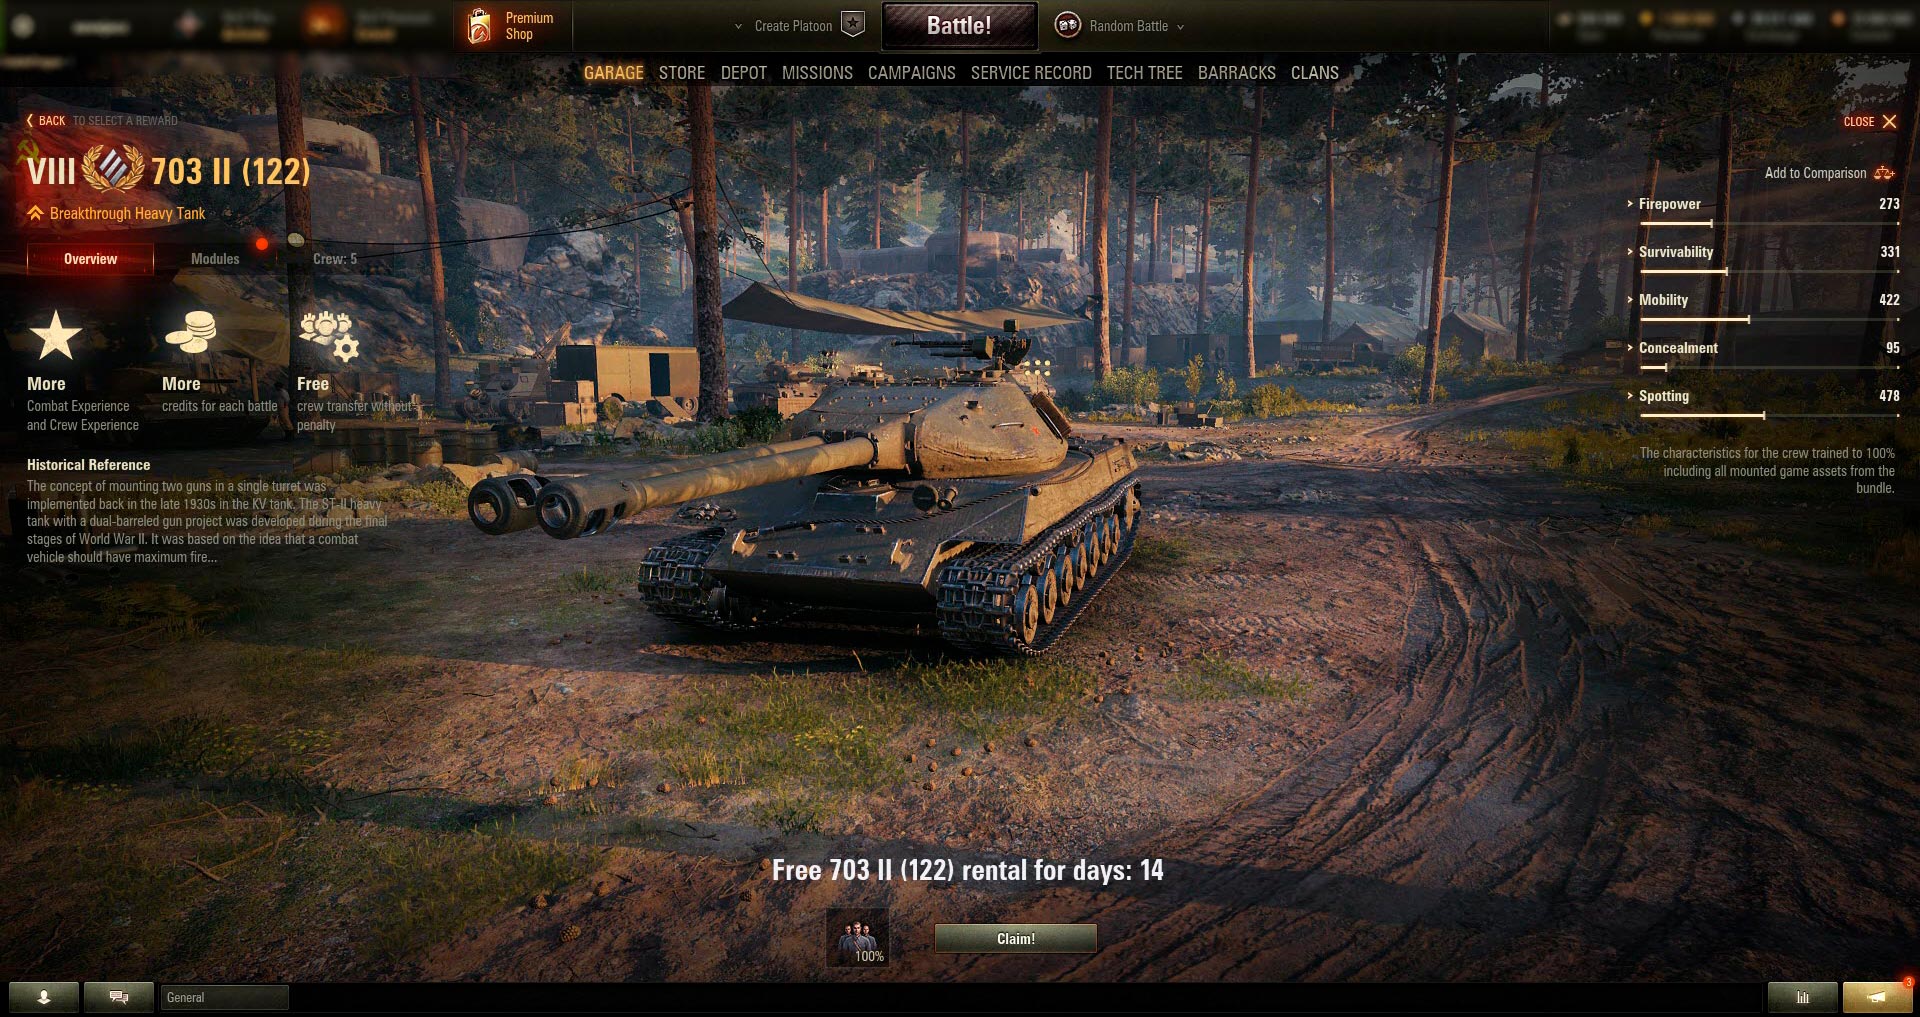 Harriers Unite! New Prime Gaming Package Delivers New Content General News World of Tanks